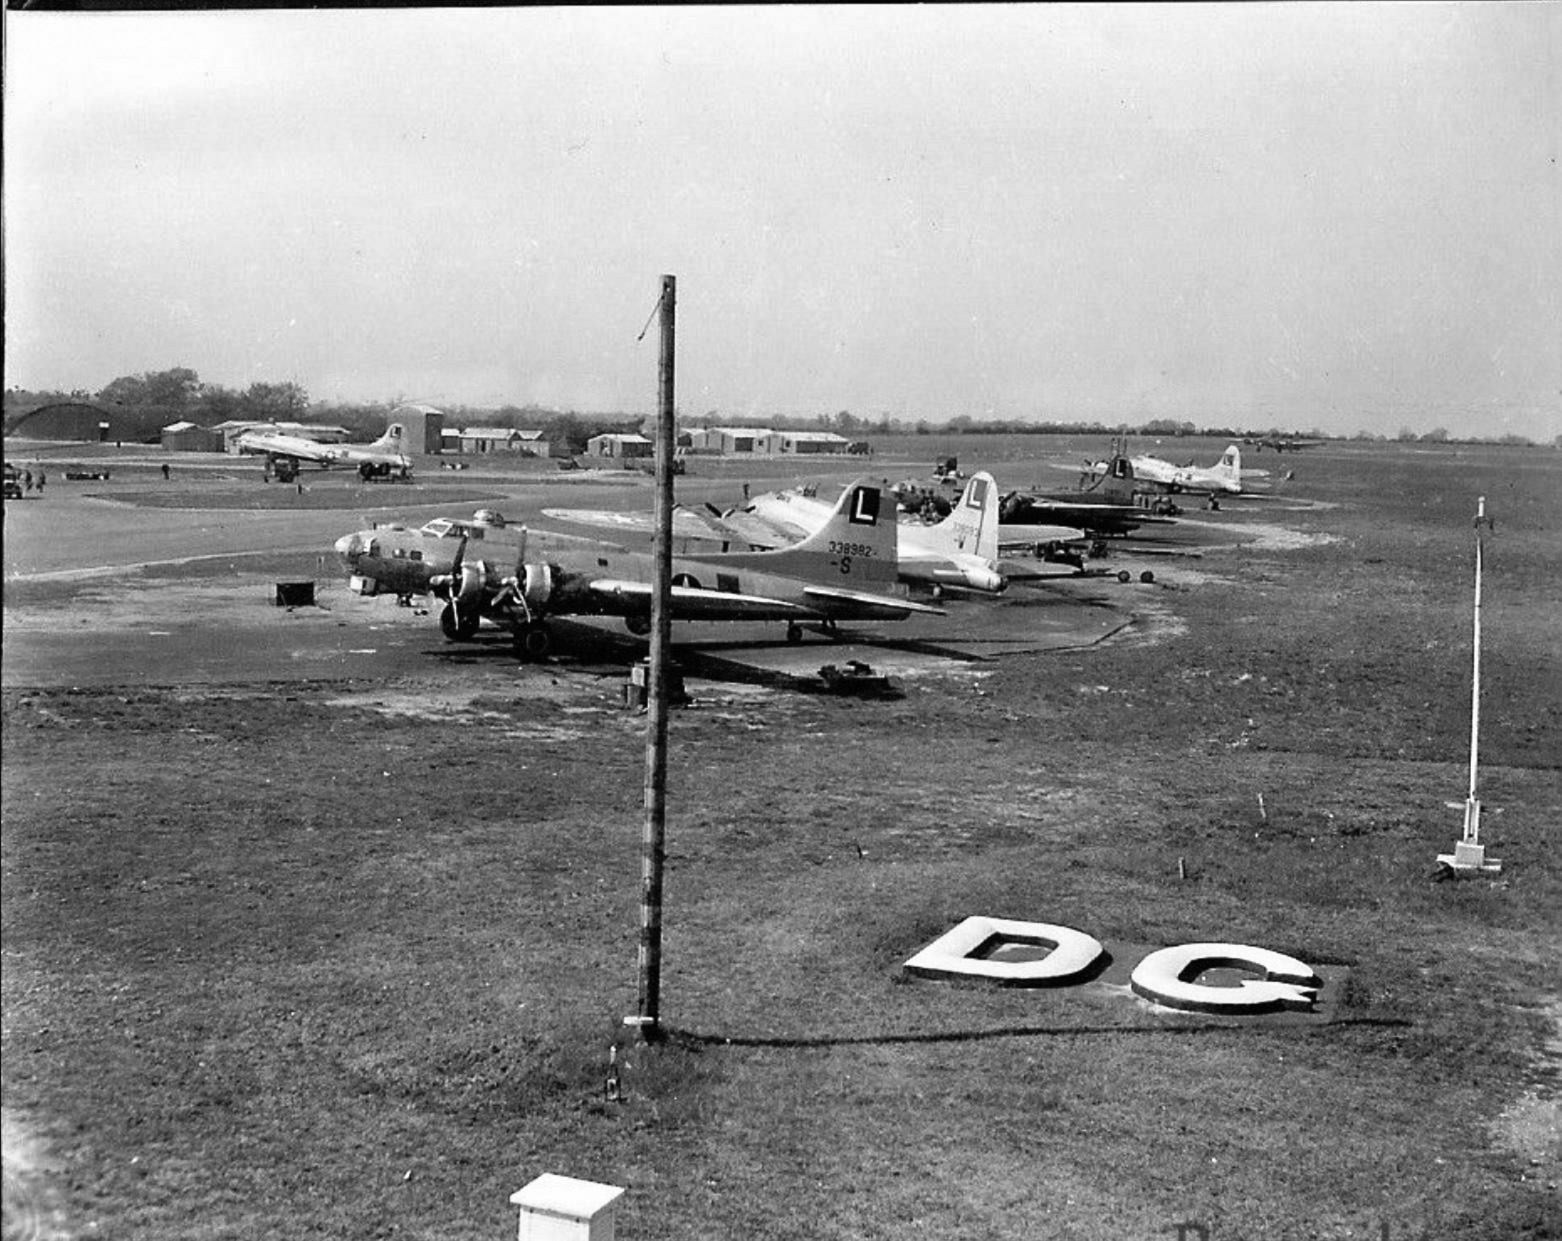 A view of 452nd Bomb Group's B-17s parked on the hardstand at Deopham Green in East Anglia.